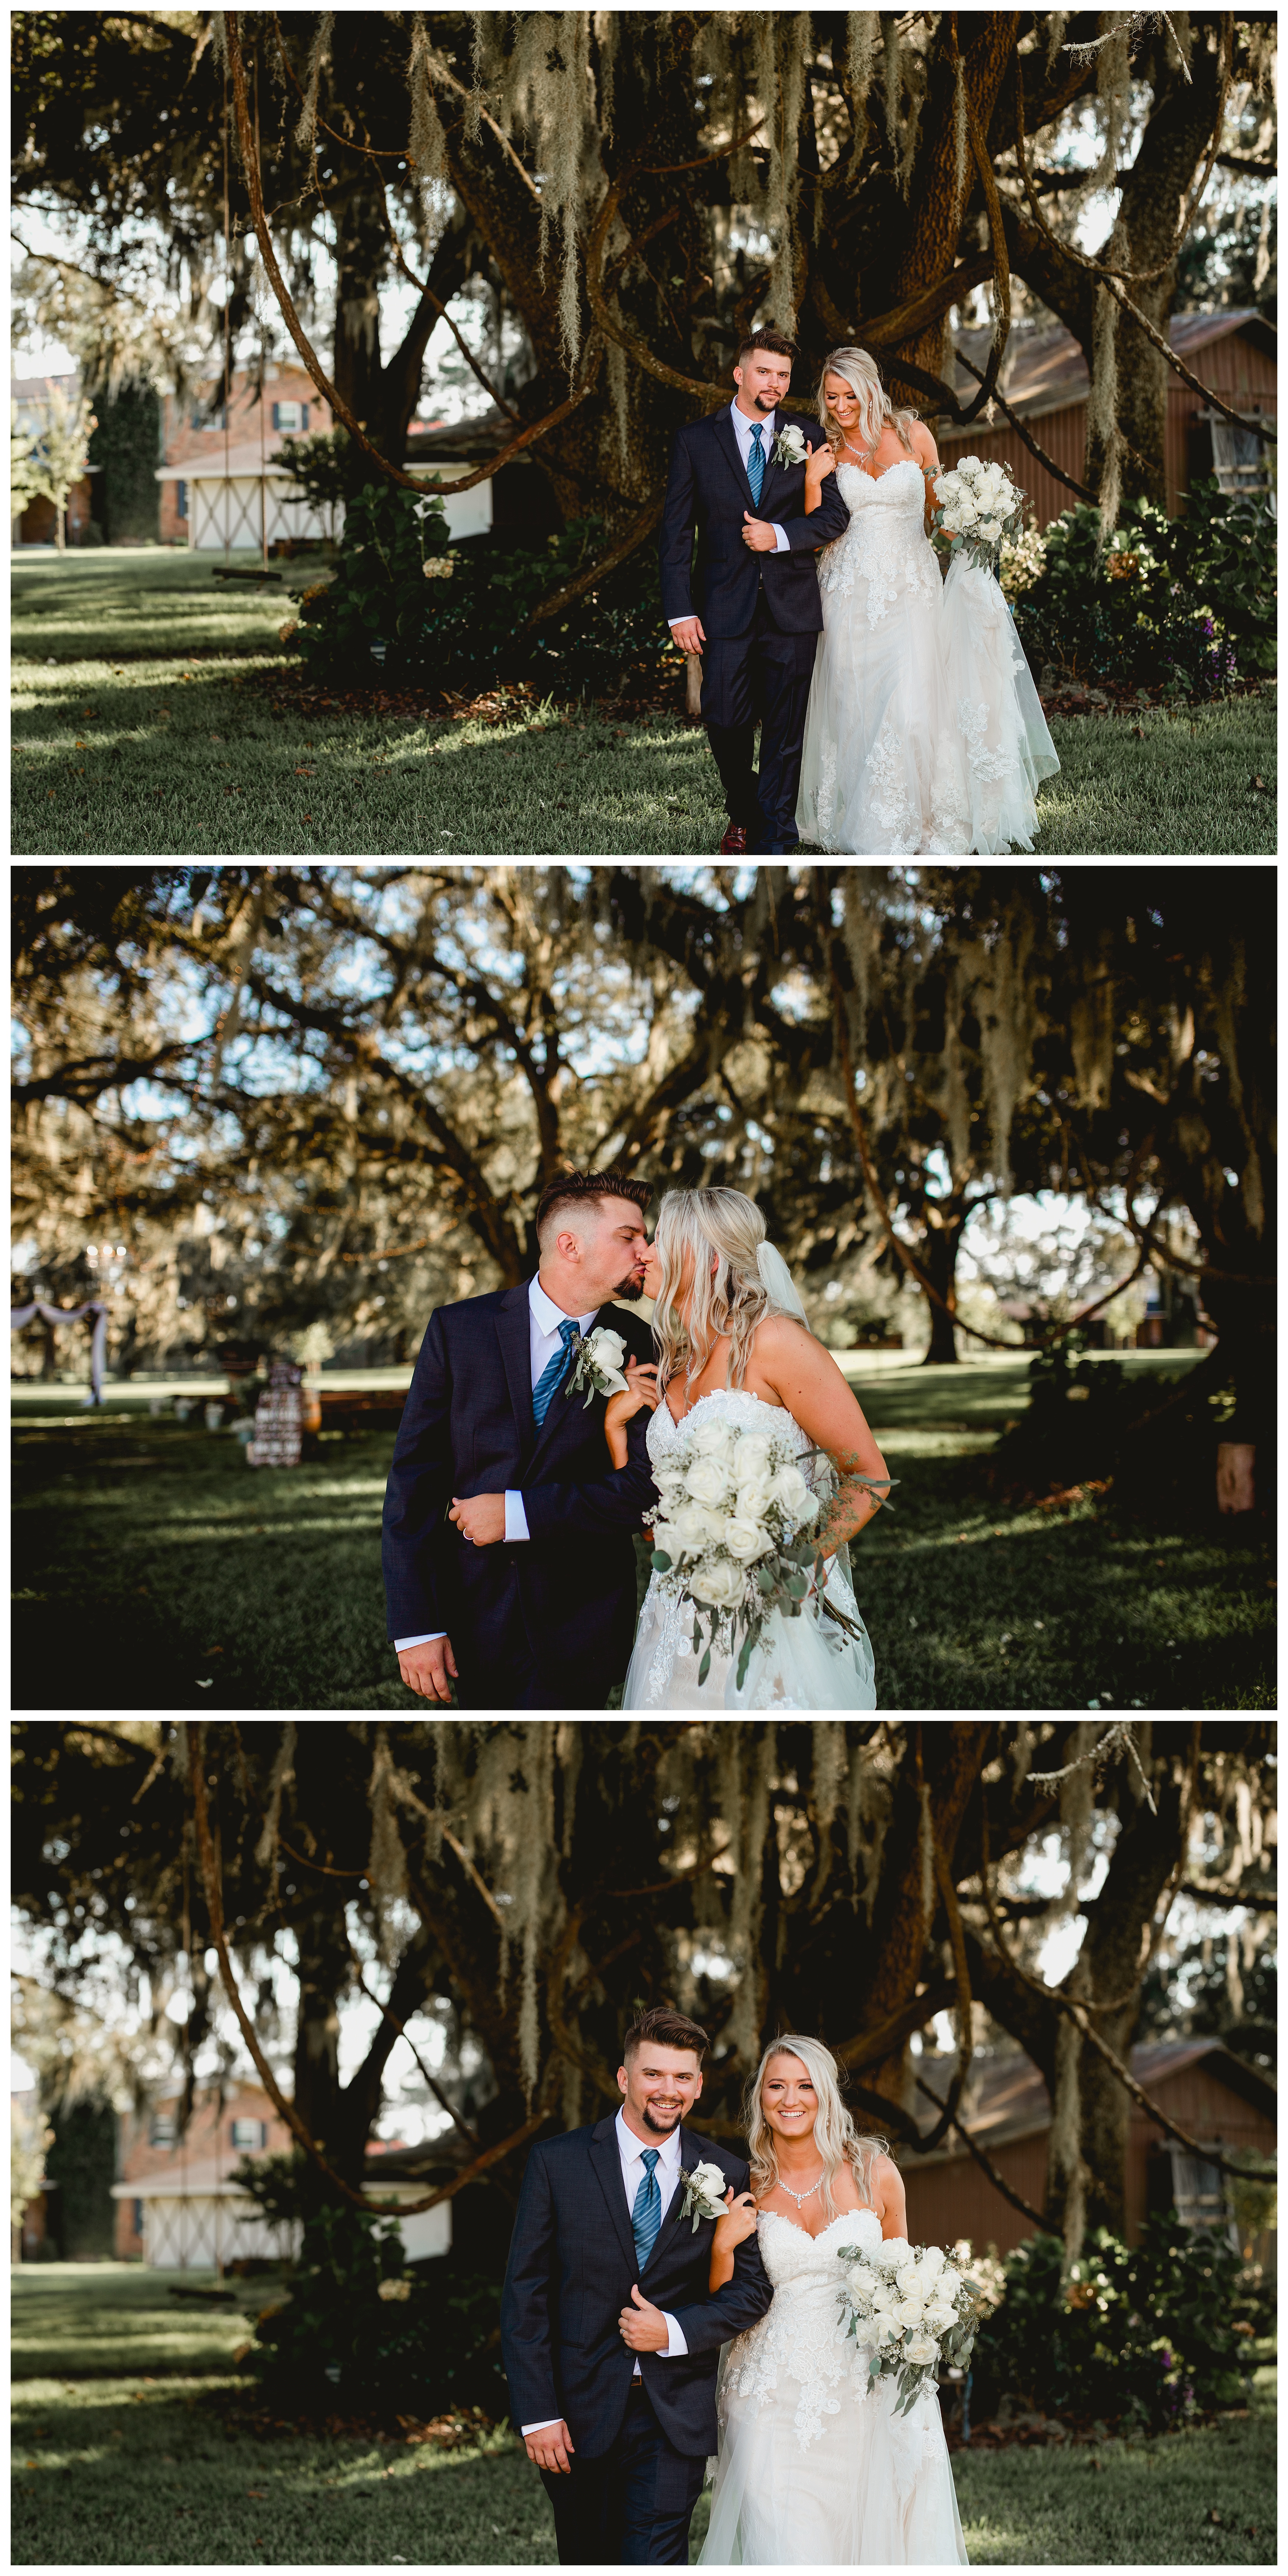 Natural and candid bride and groom pictures by professional wedding photographer in North Florida. Shelly Williams Photography